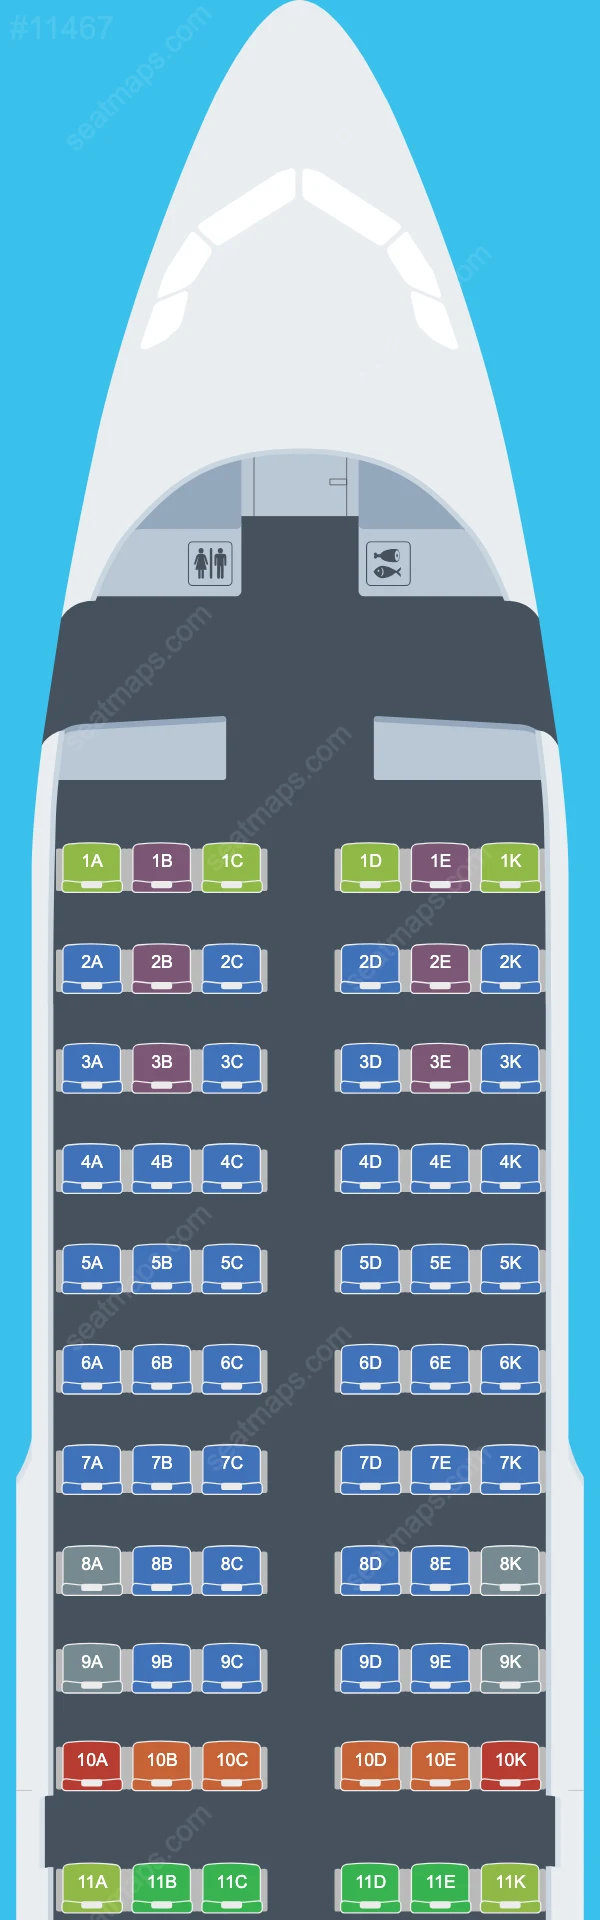 Avianca Airbus A319 Seat Maps A319-100 V.1